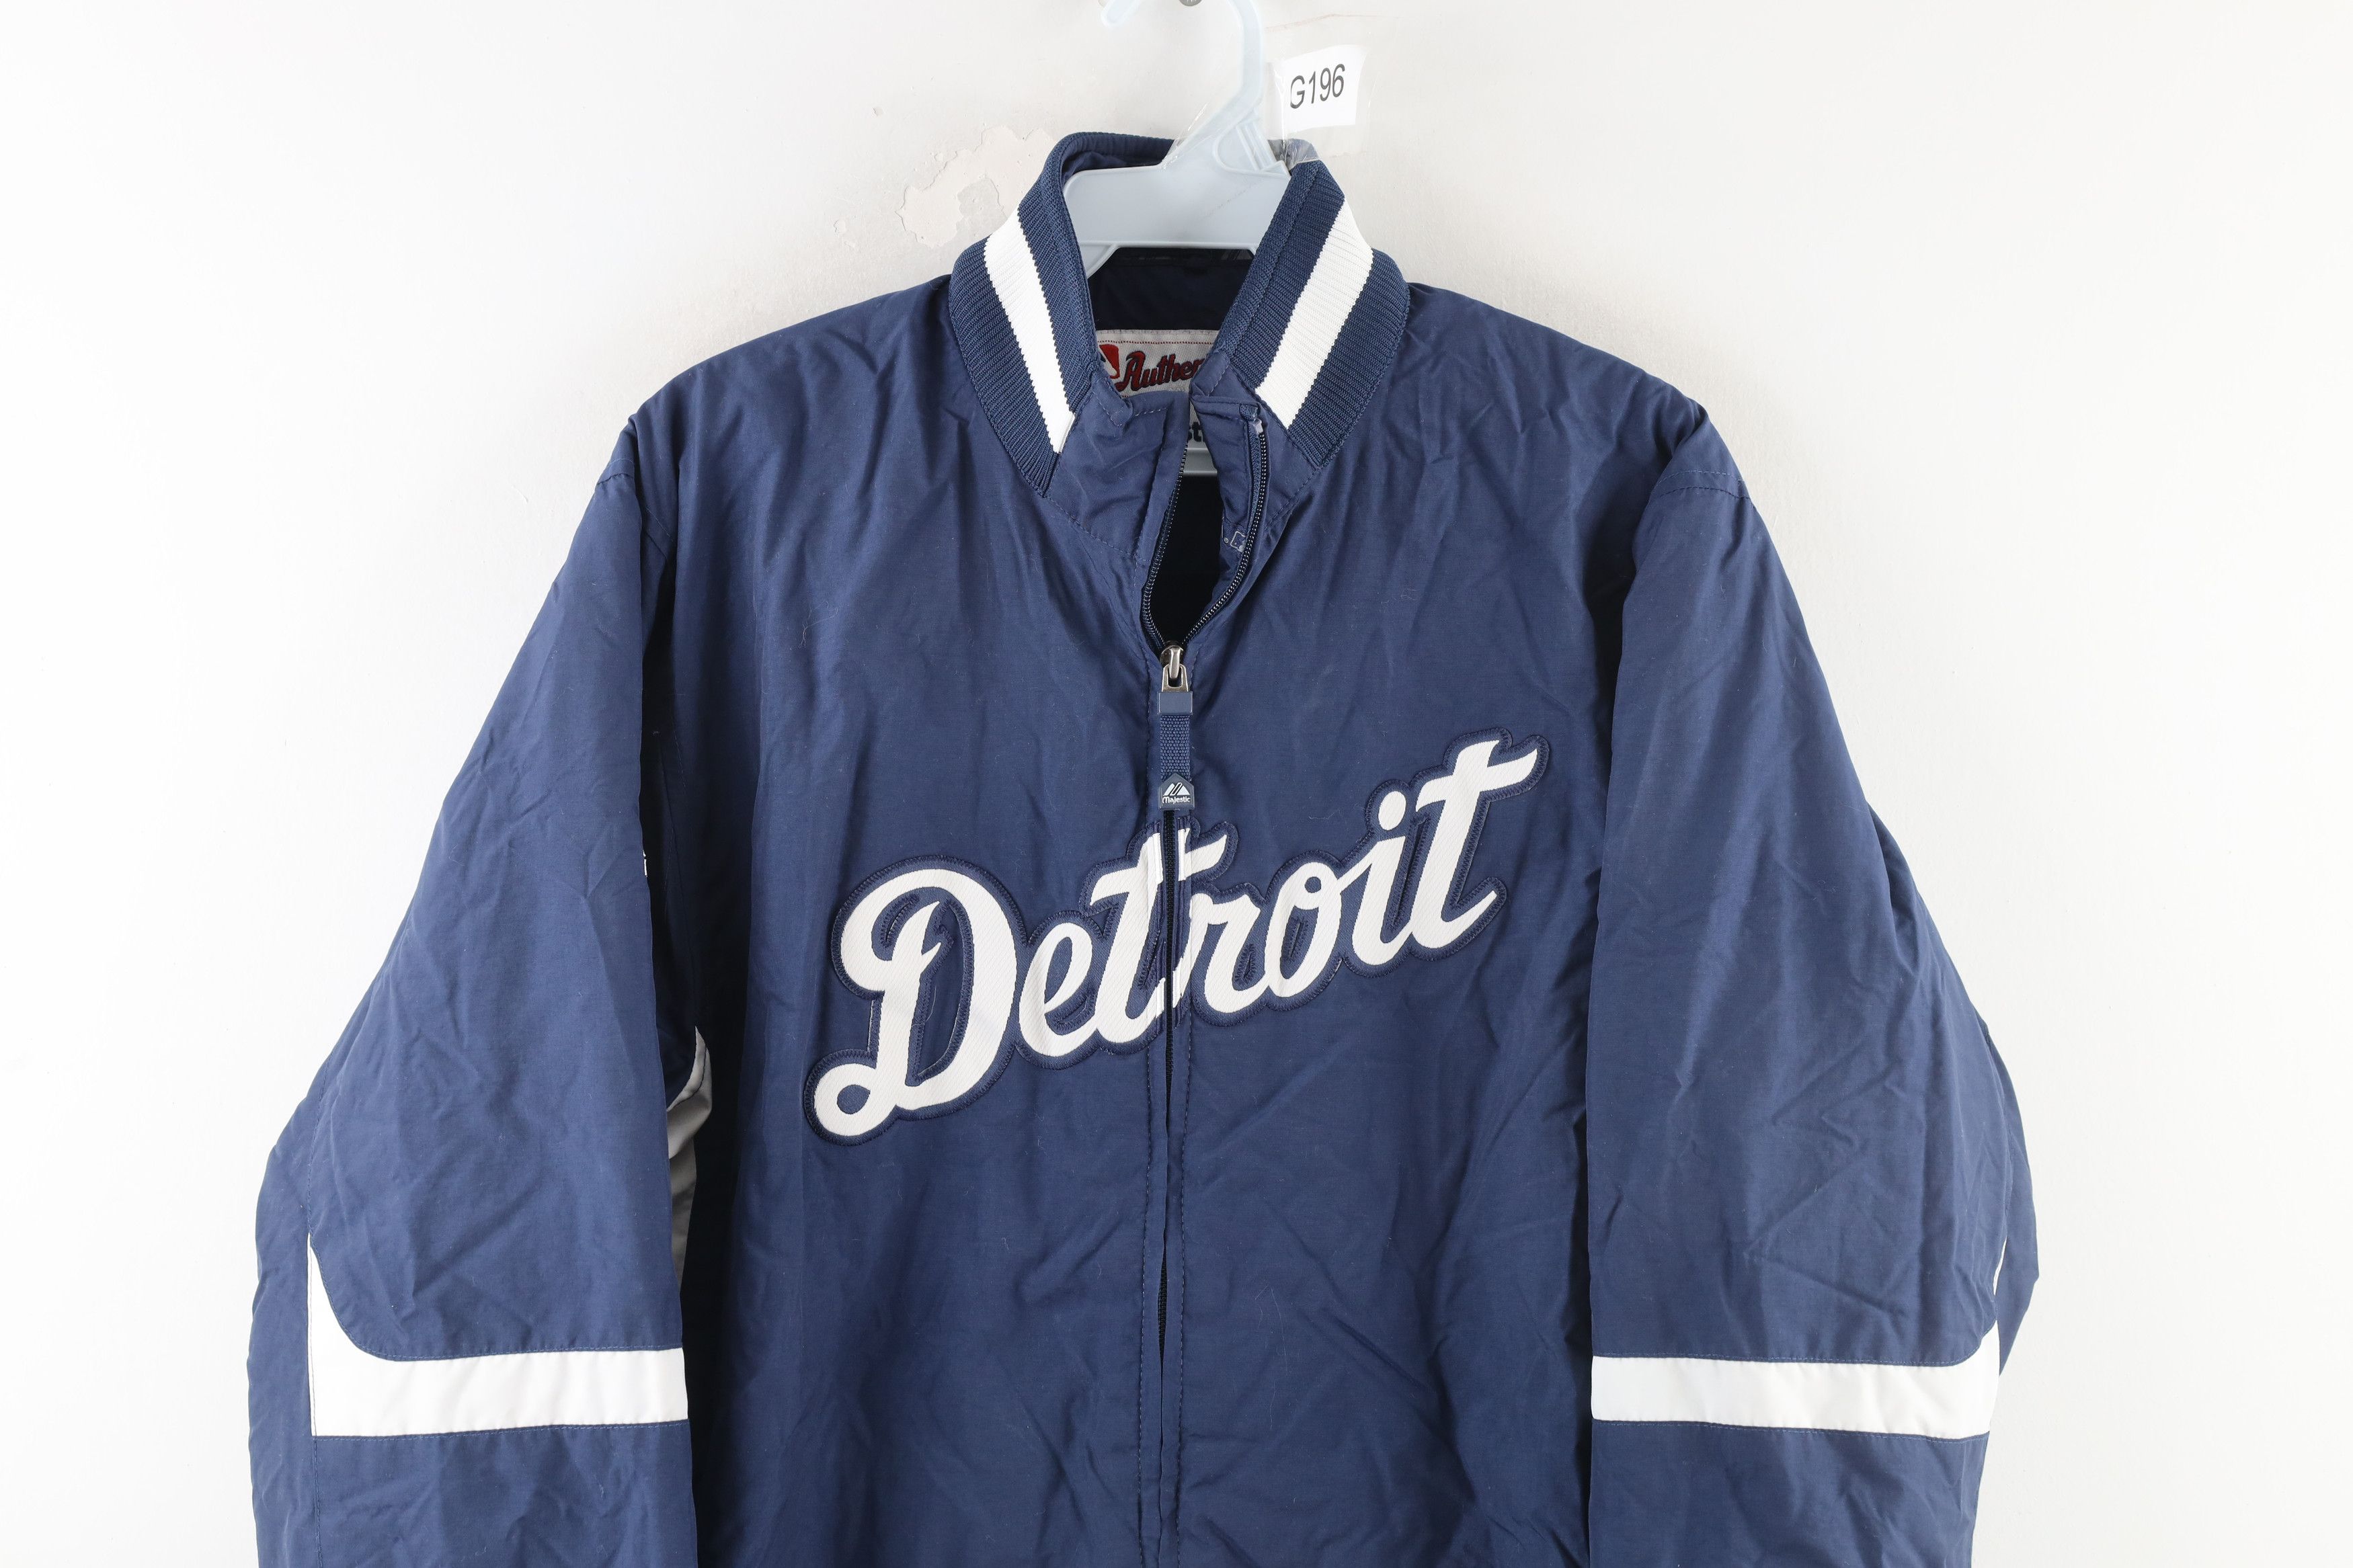 Vintage Vintage Majestic Detroit Tigers Out Insulated Bomber Jacket Size US S / EU 44-46 / 1 - 2 Preview